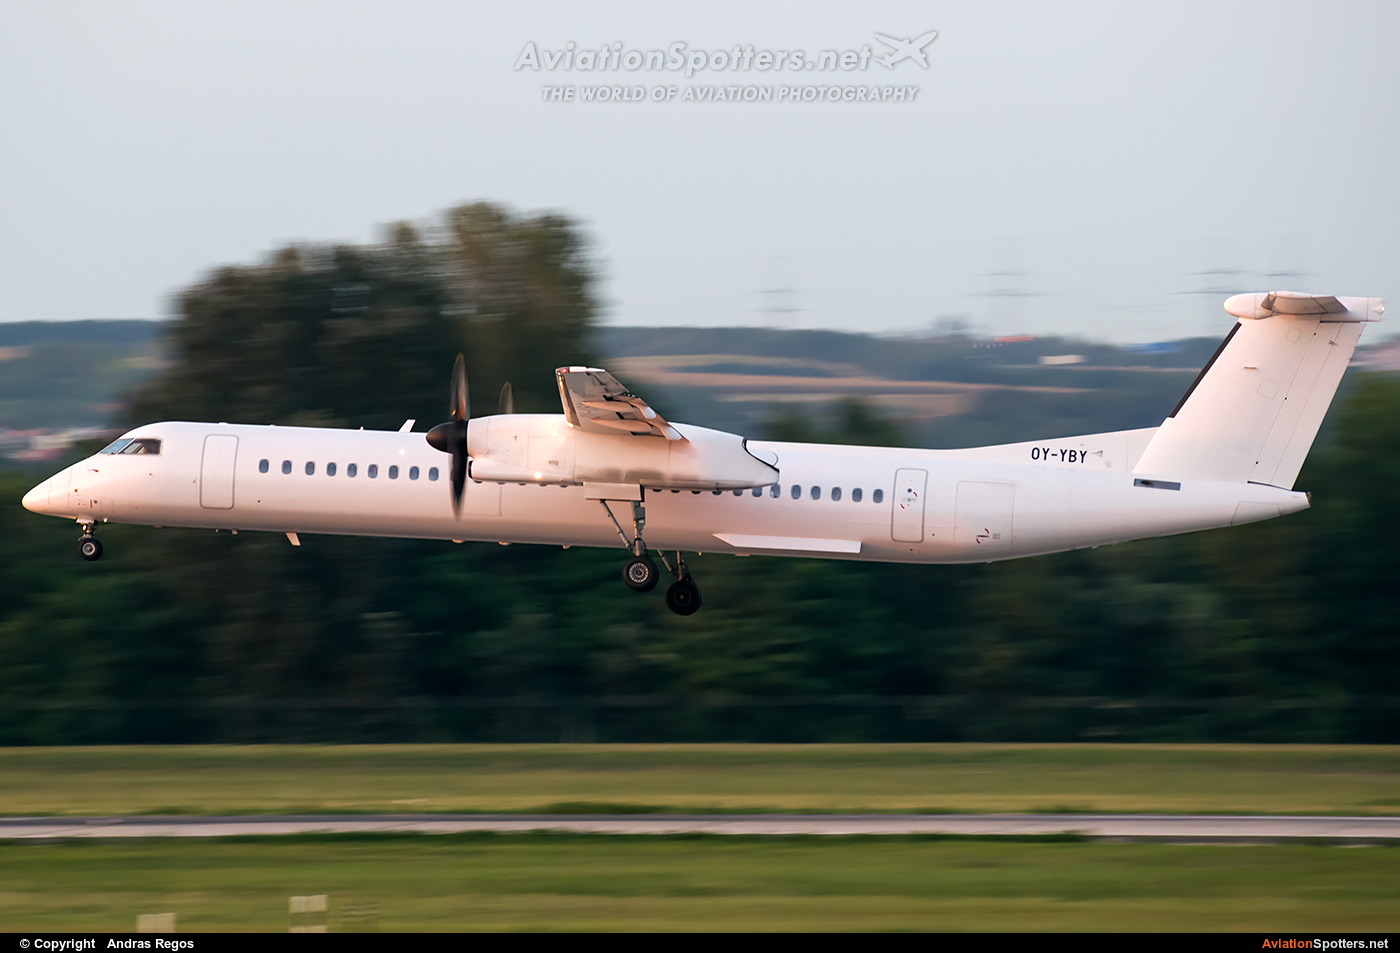 LOT - Polish Airlines  -  DHC-8-402Q Dash 8  (OY-YBY) By Andras Regos (regos)